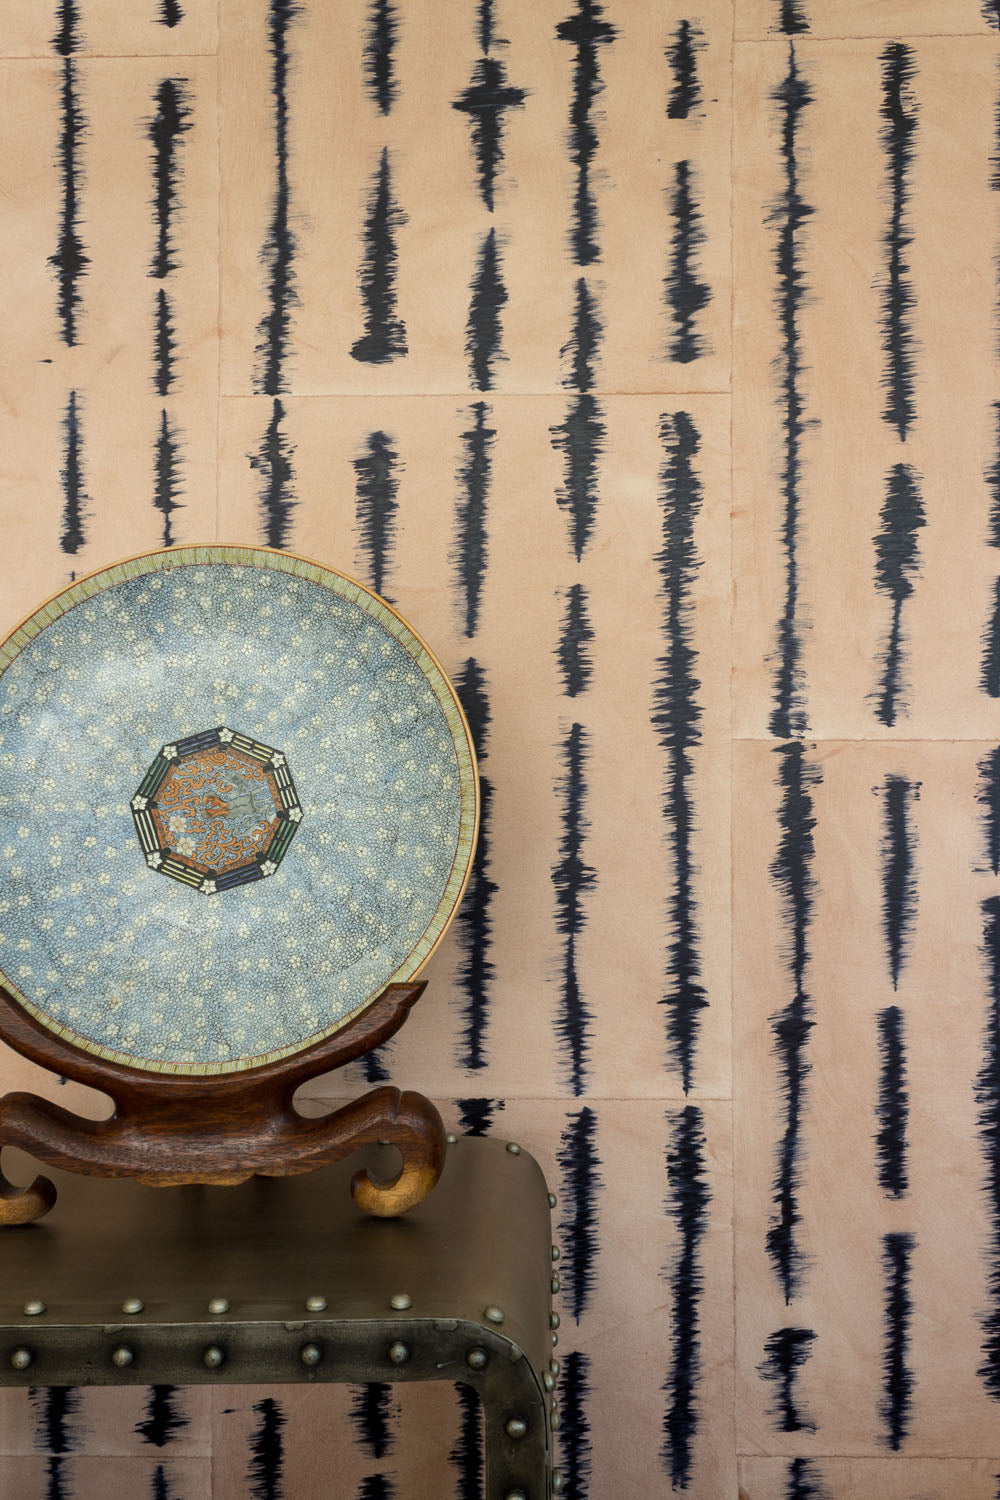 A china plate stands in front of a wall papered in an irregular vibrating linear pattern in navy on a tan field.